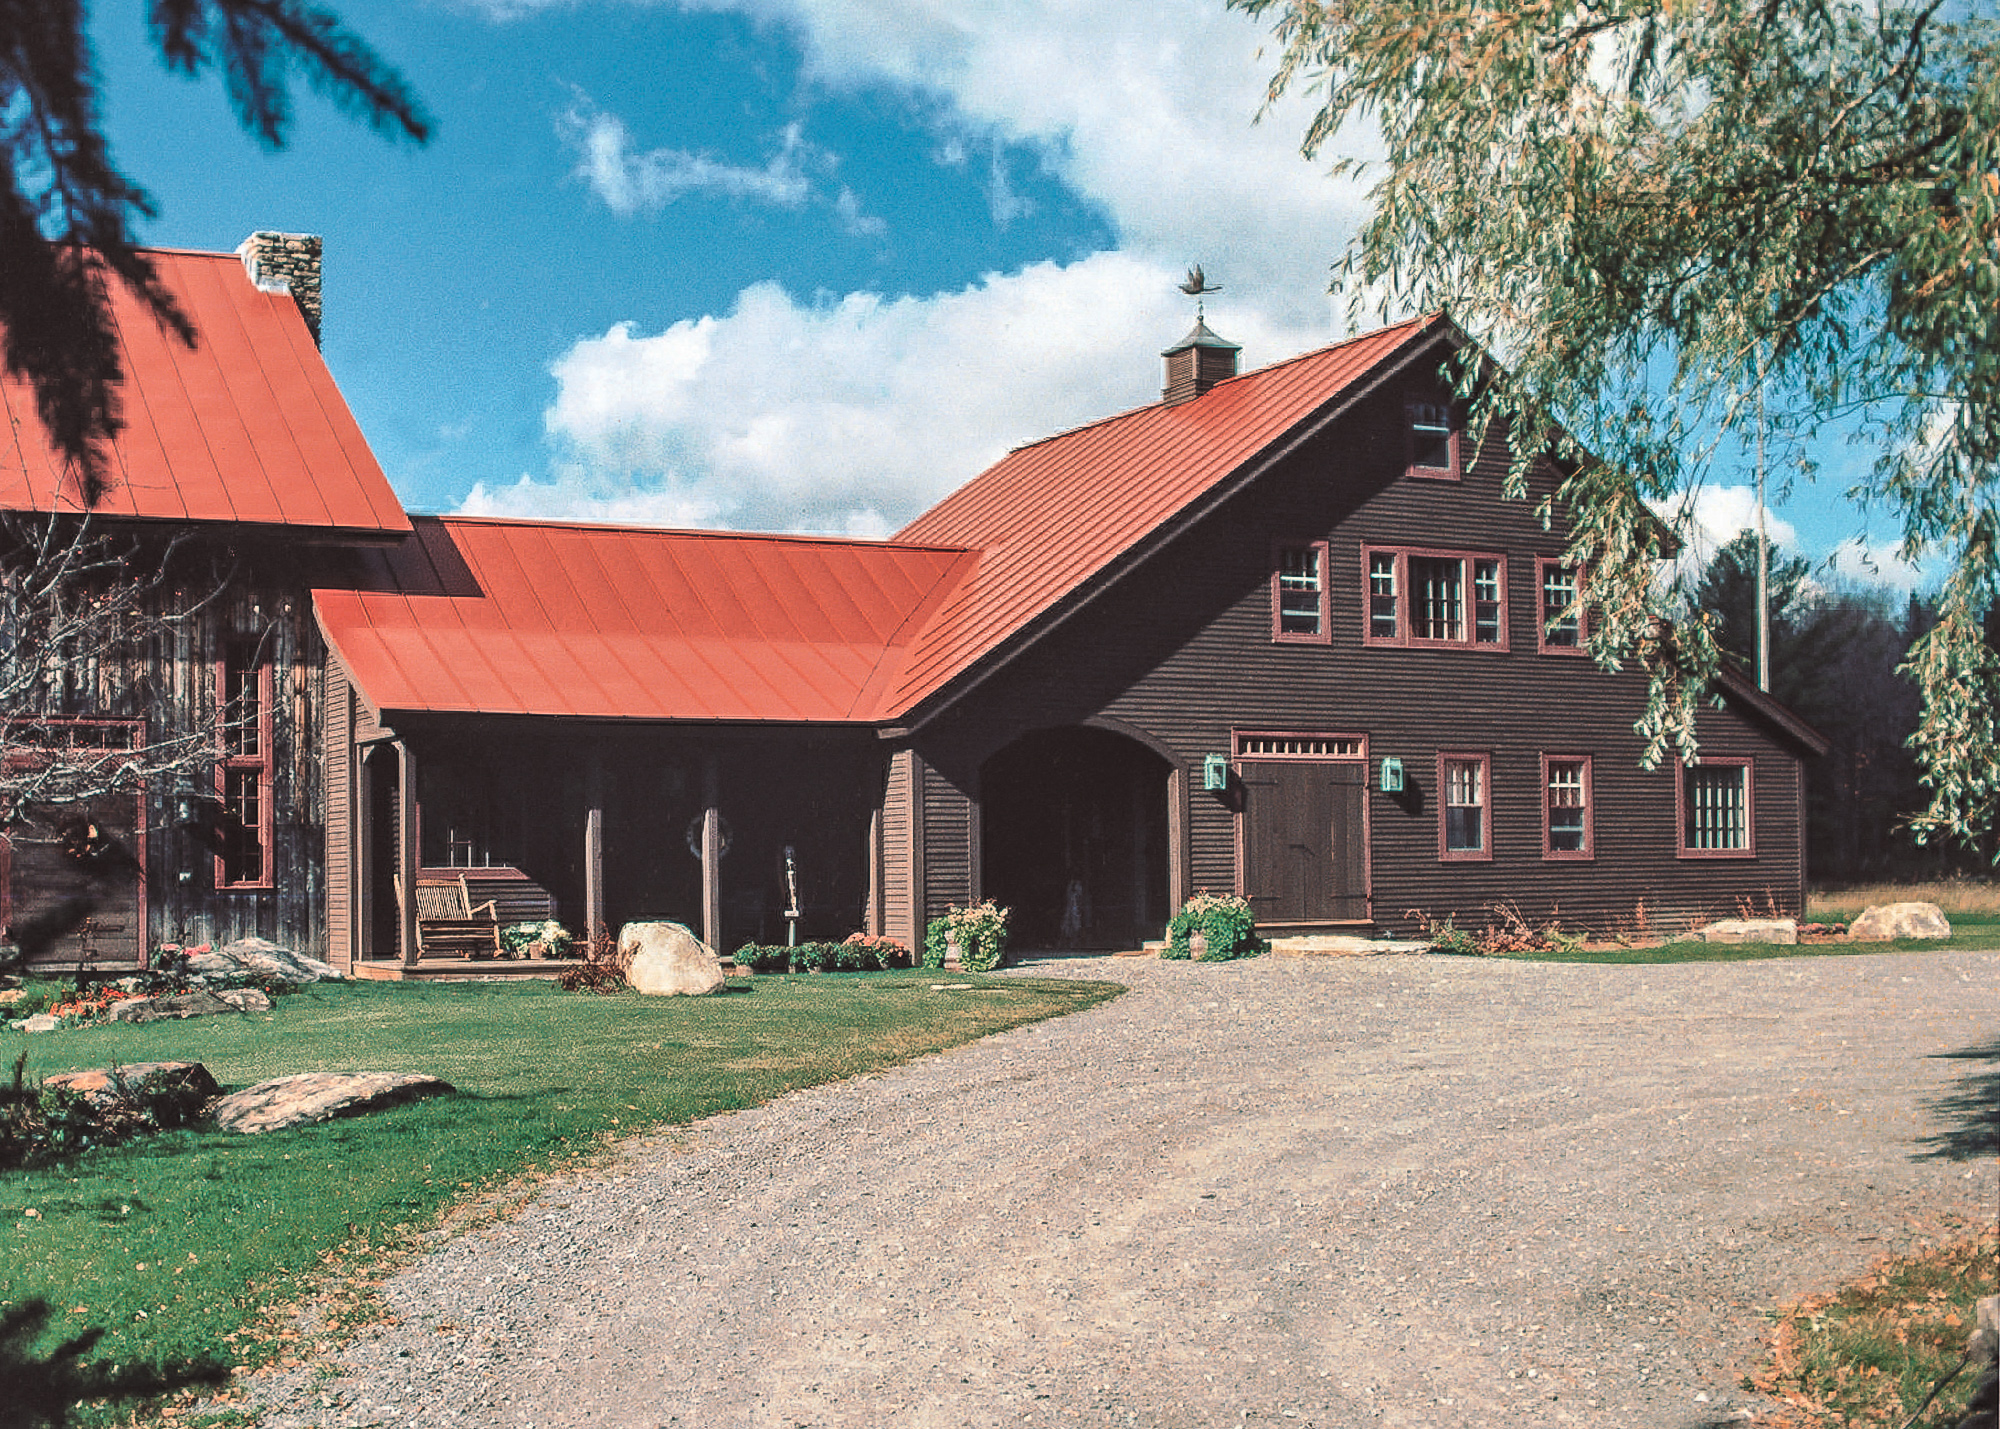 See a Farm House Style Timber Frame